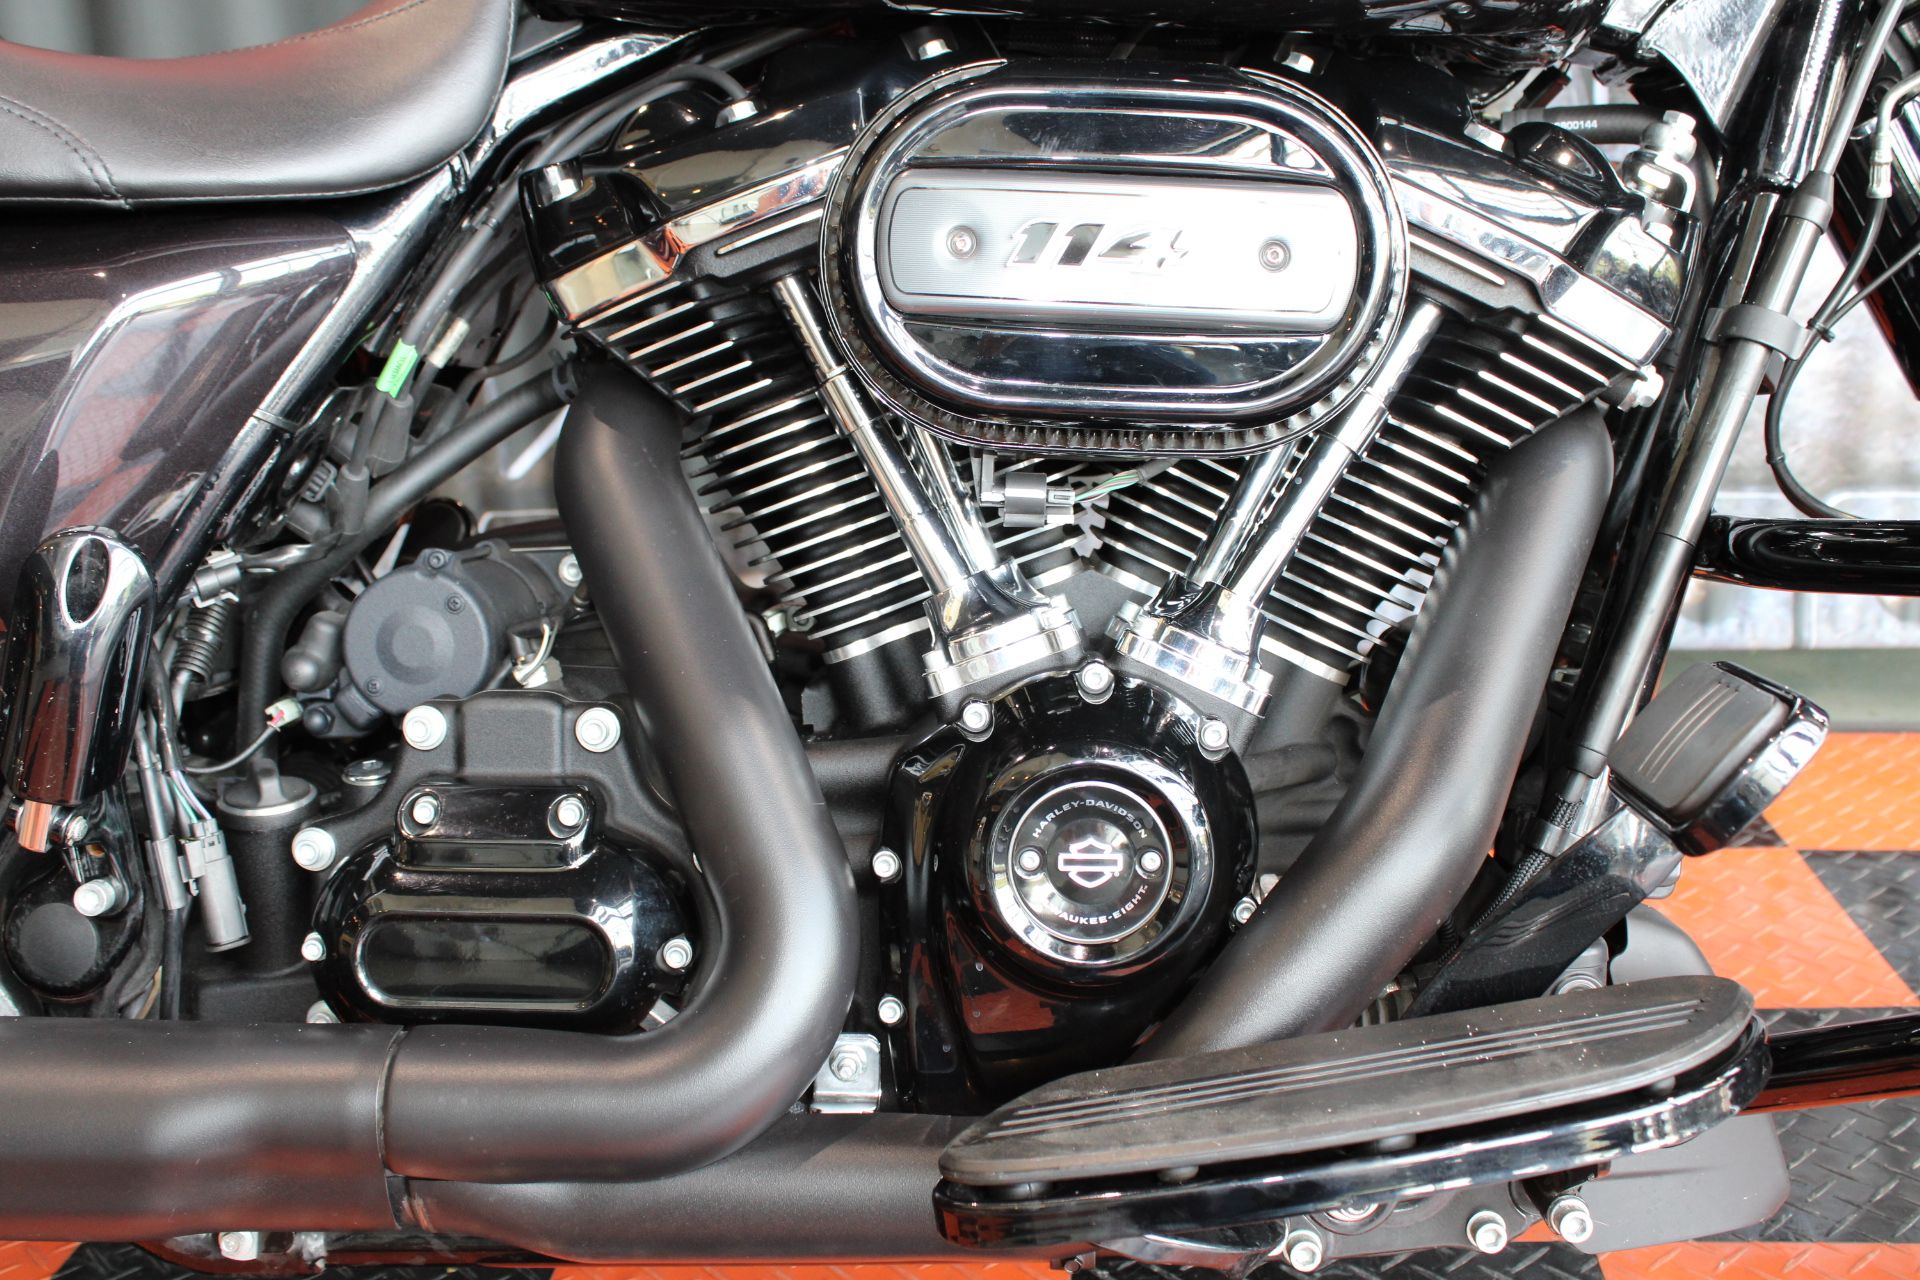 2021 Harley-Davidson Road King® Special in Shorewood, Illinois - Photo 7